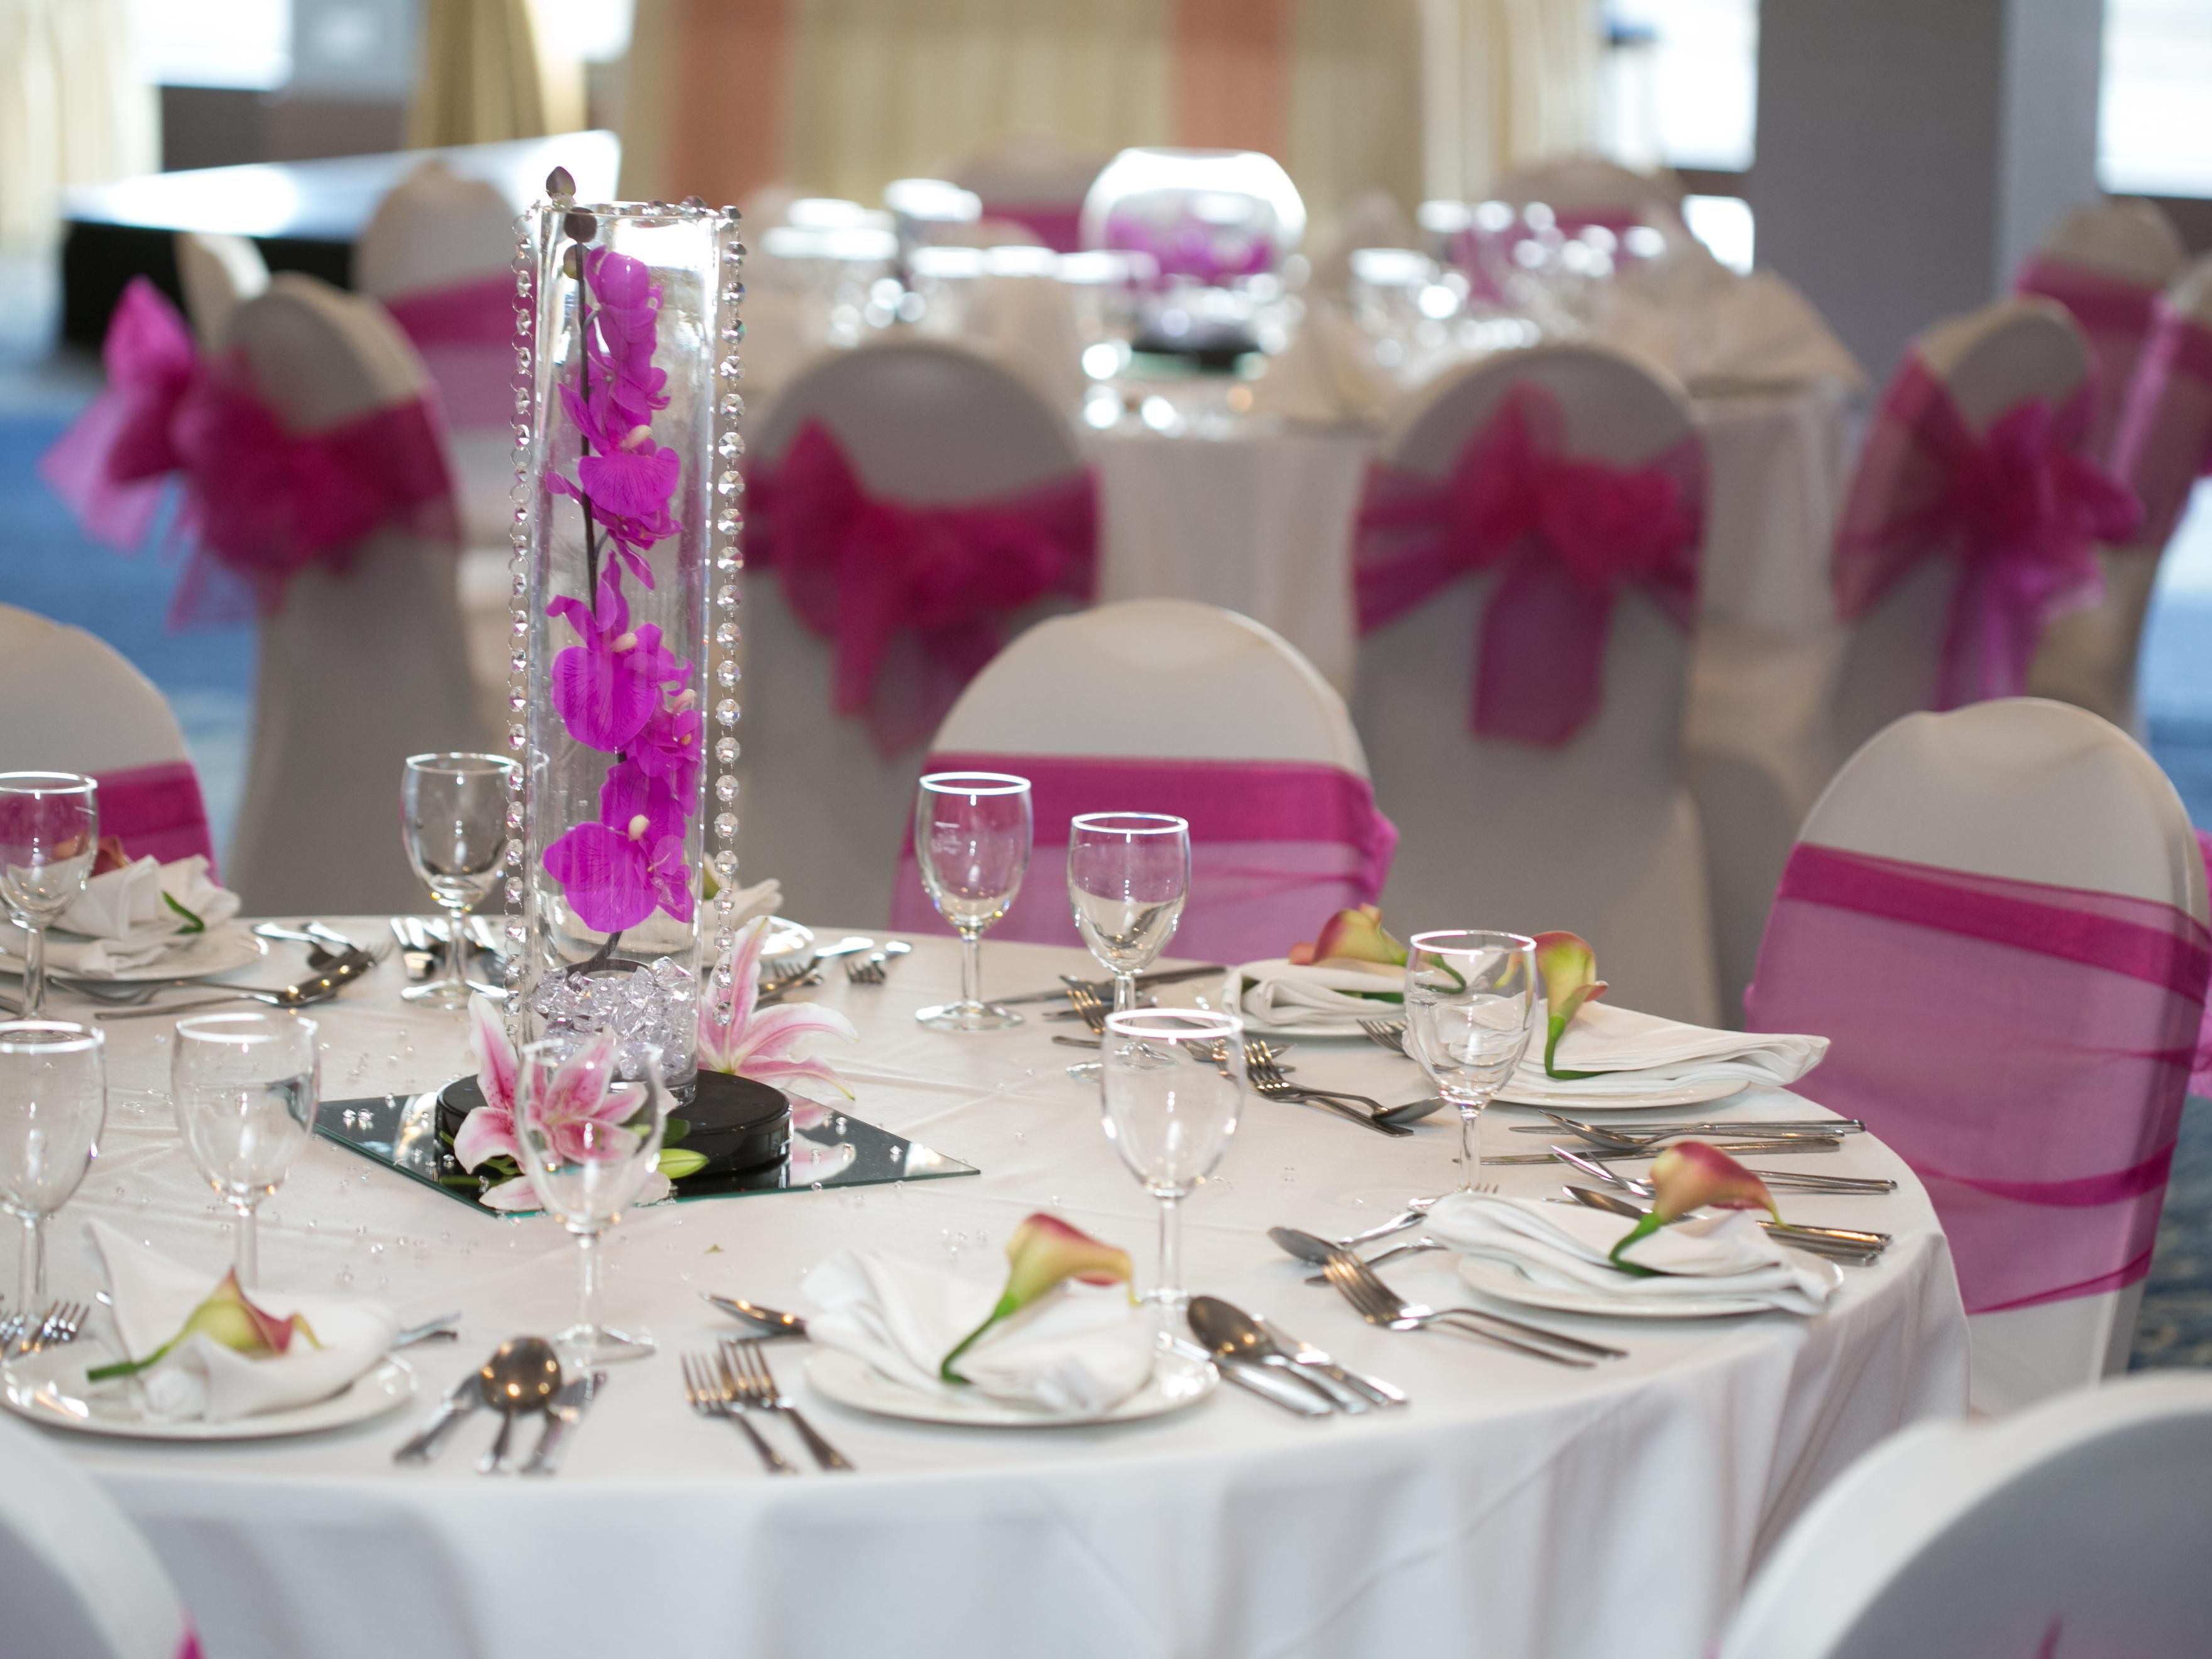 Say 'I do' at Wembley where we can host intimate celebrations for up to 30 to large lavish affairs for up to 500 in the impressive Empire Suite with its glittering chandeliers, adding an extra sparkle to your magical day. Our dedicated event professionals specialise in Asian wedding celebrations. 